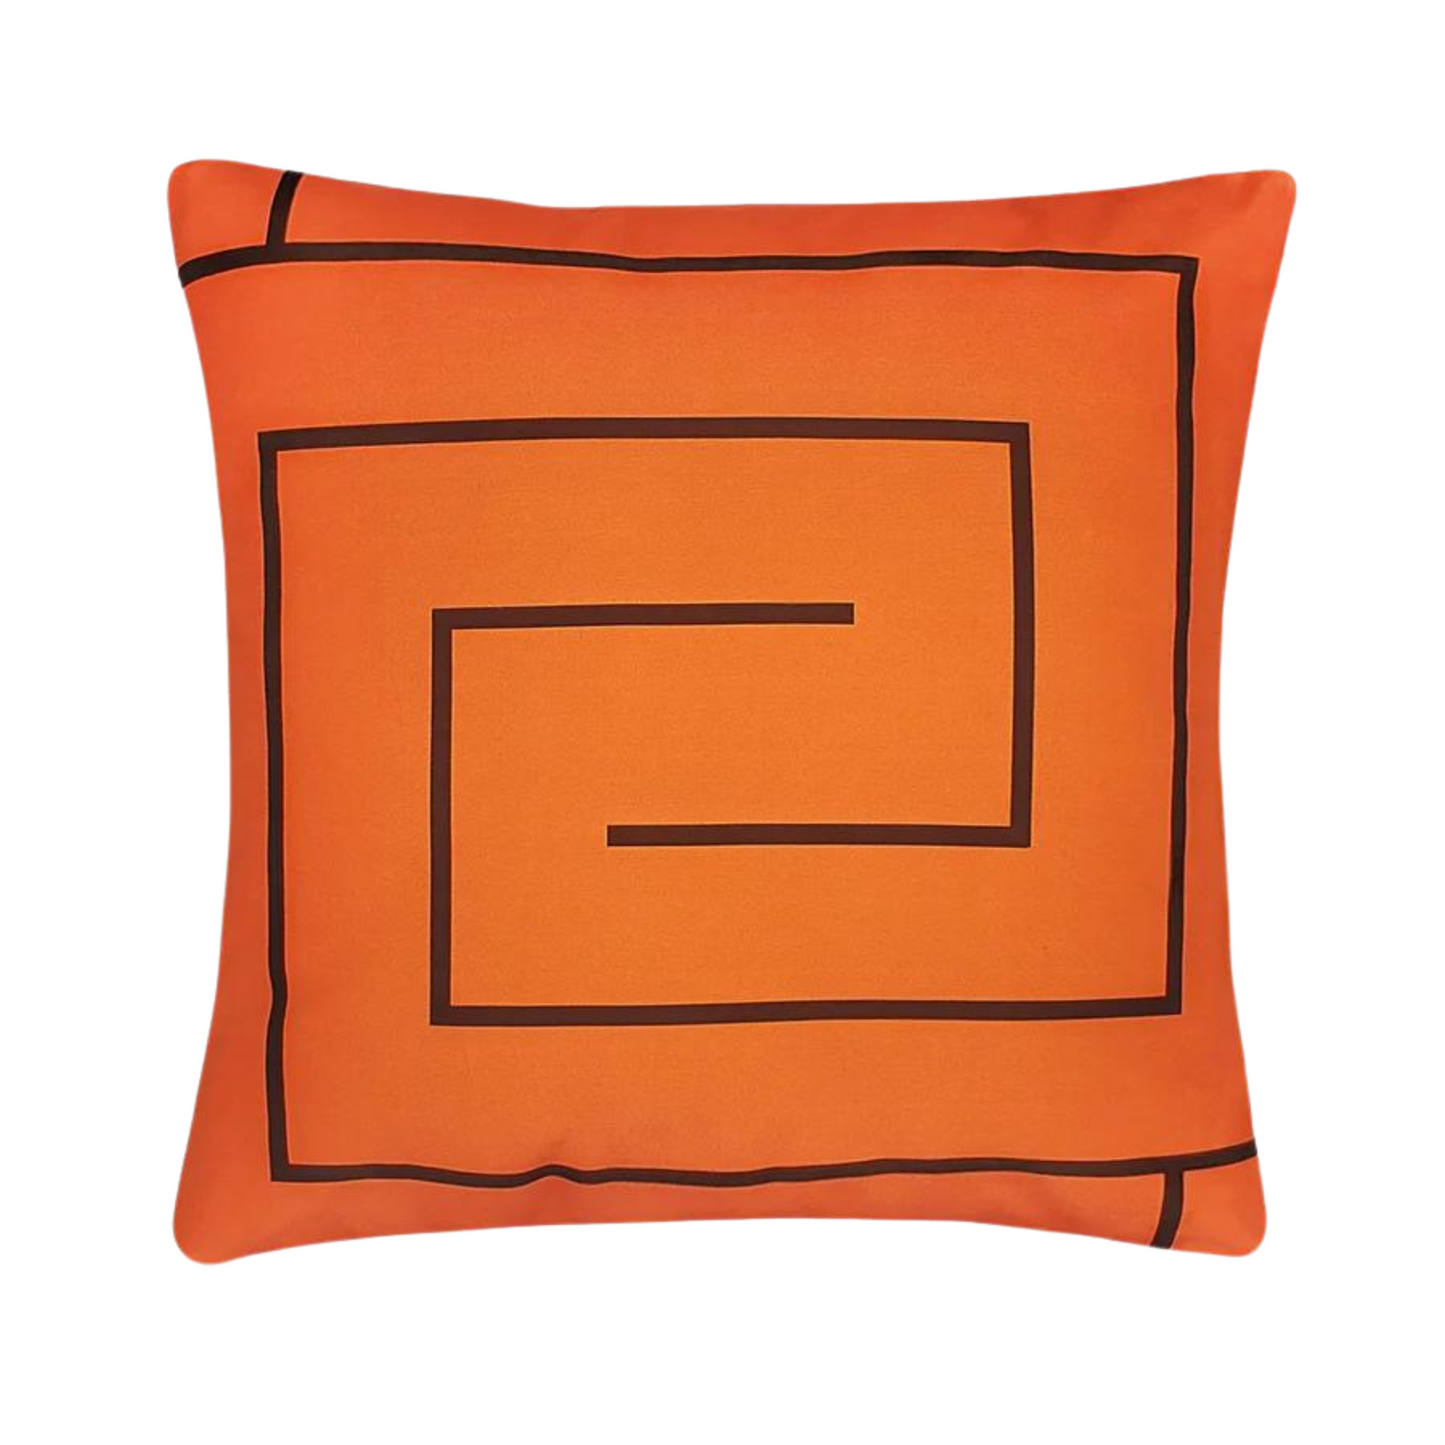 Pillow Cover - Whirling Arrow Orange